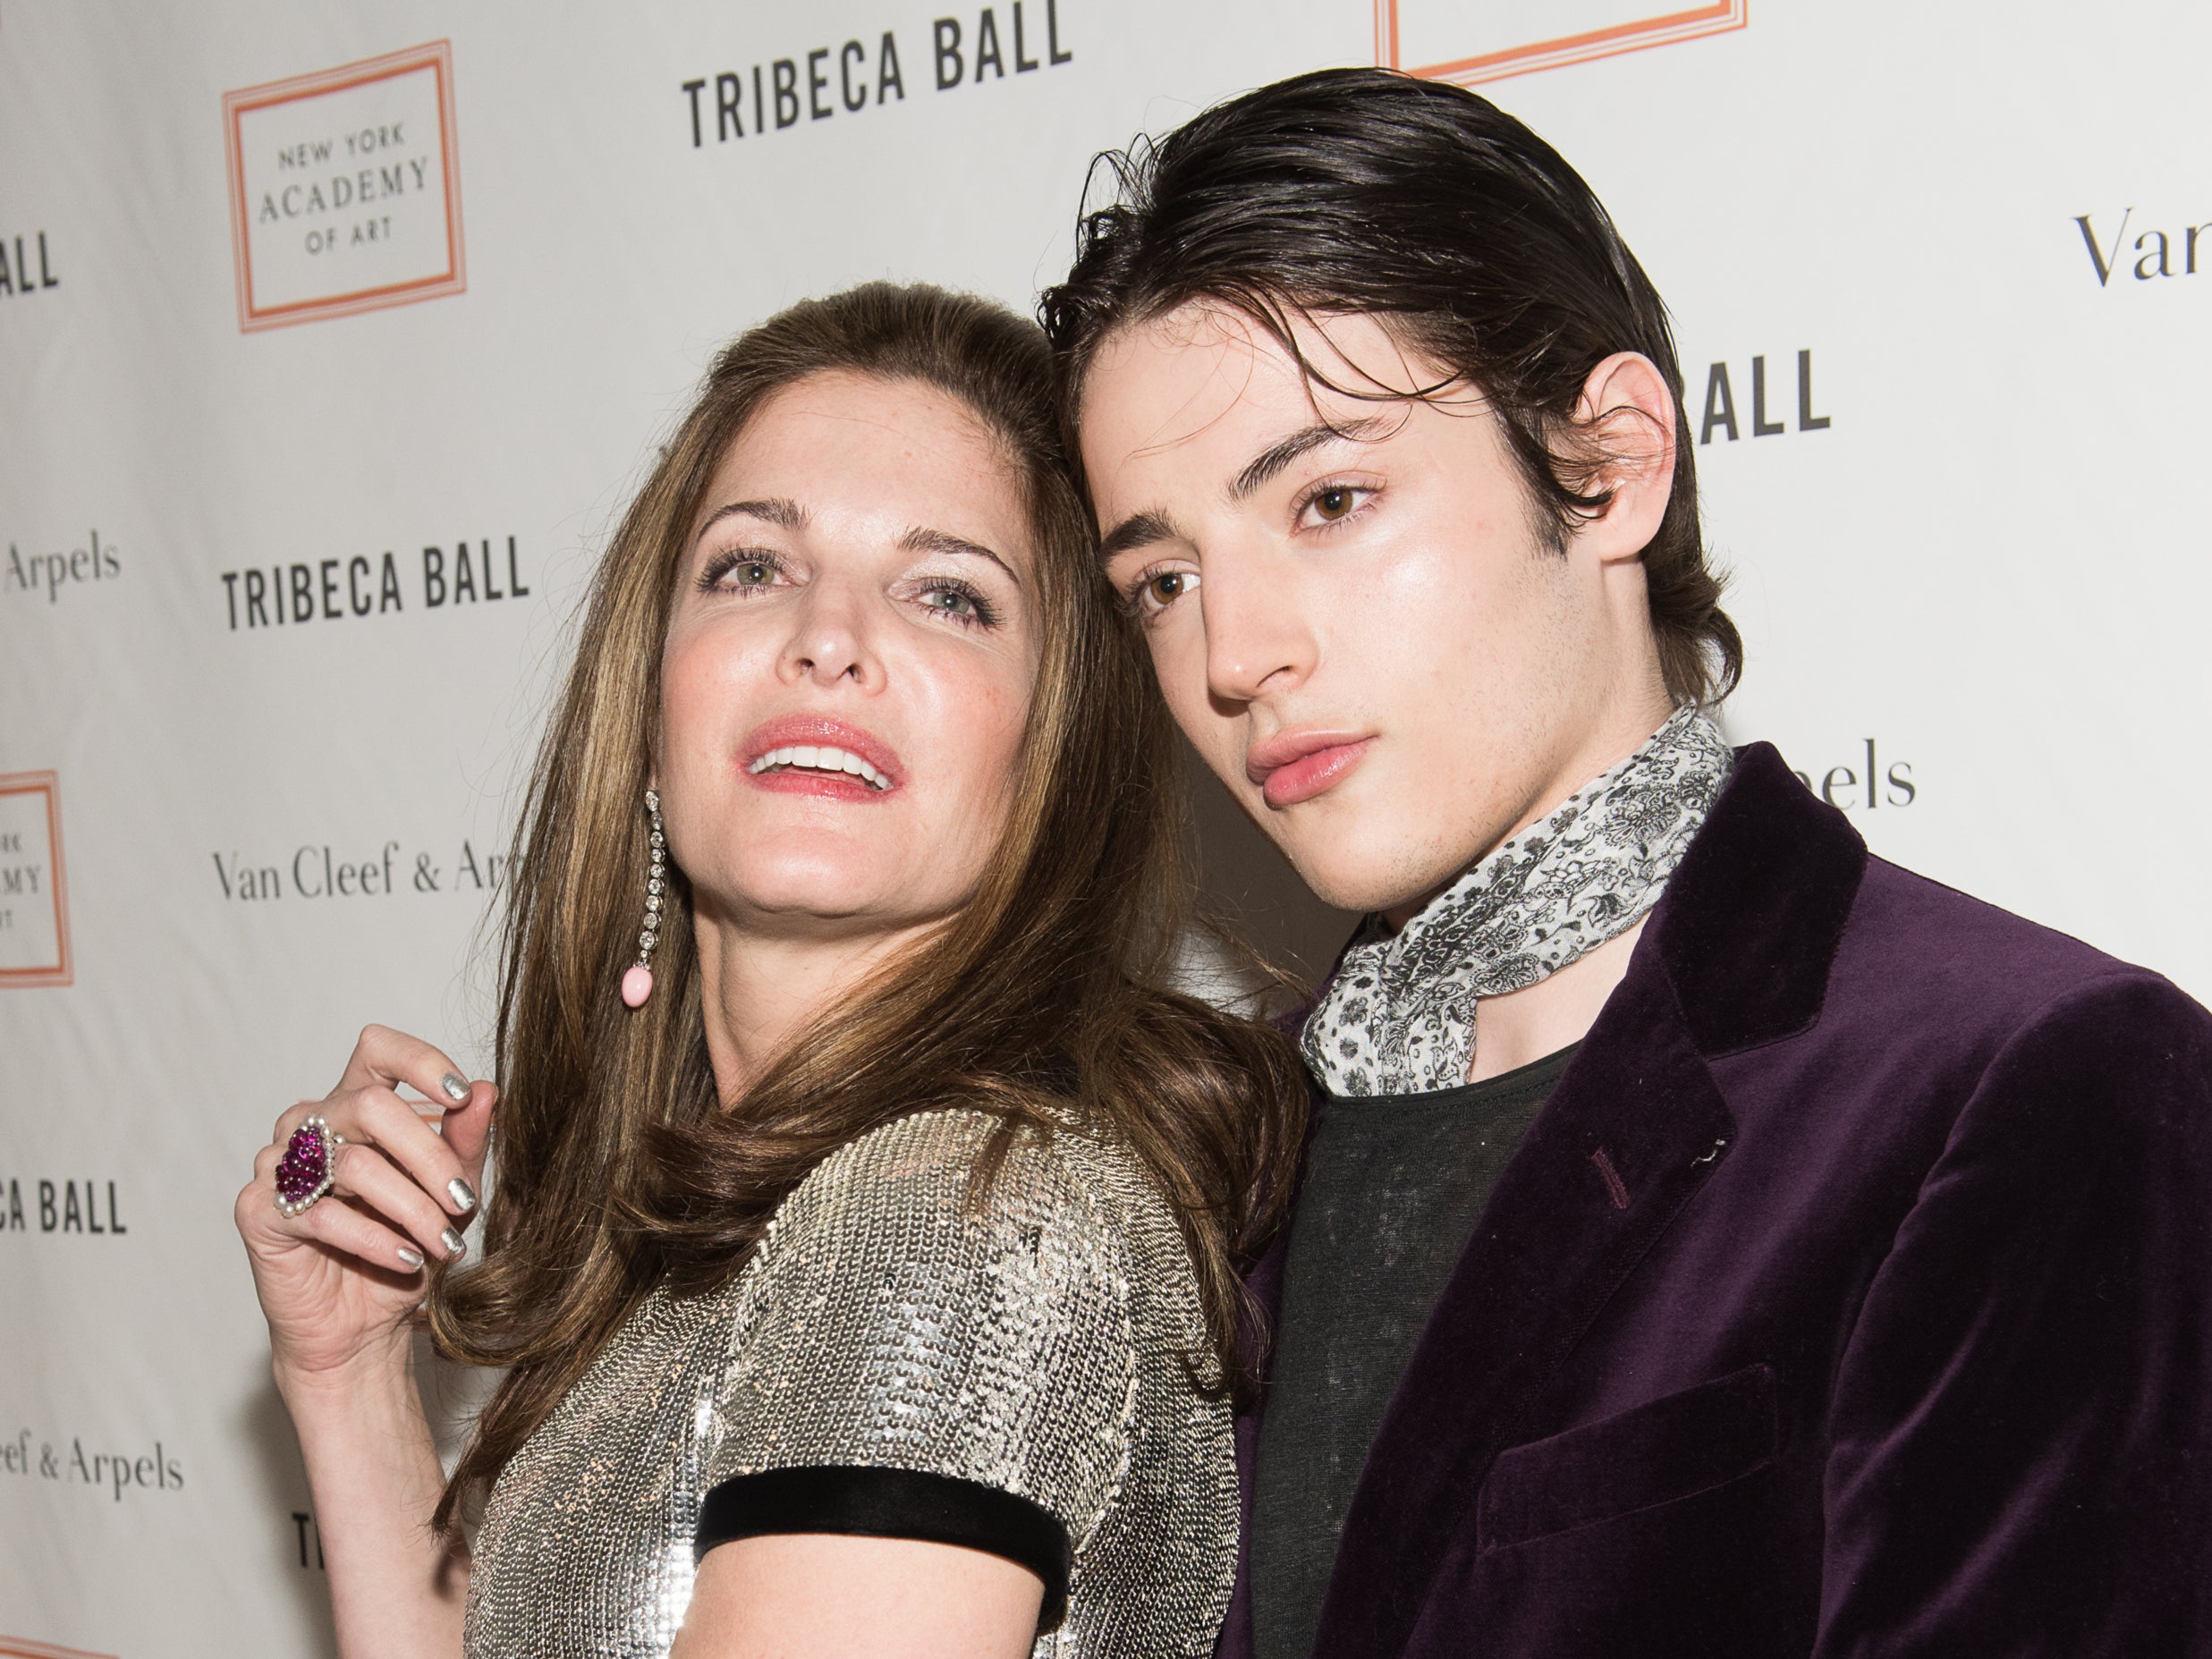 Stephanie Seymour and sonarry Brant arrive at the 2015 Tribeca Ball at New York Academy of Art on April 13, 2015